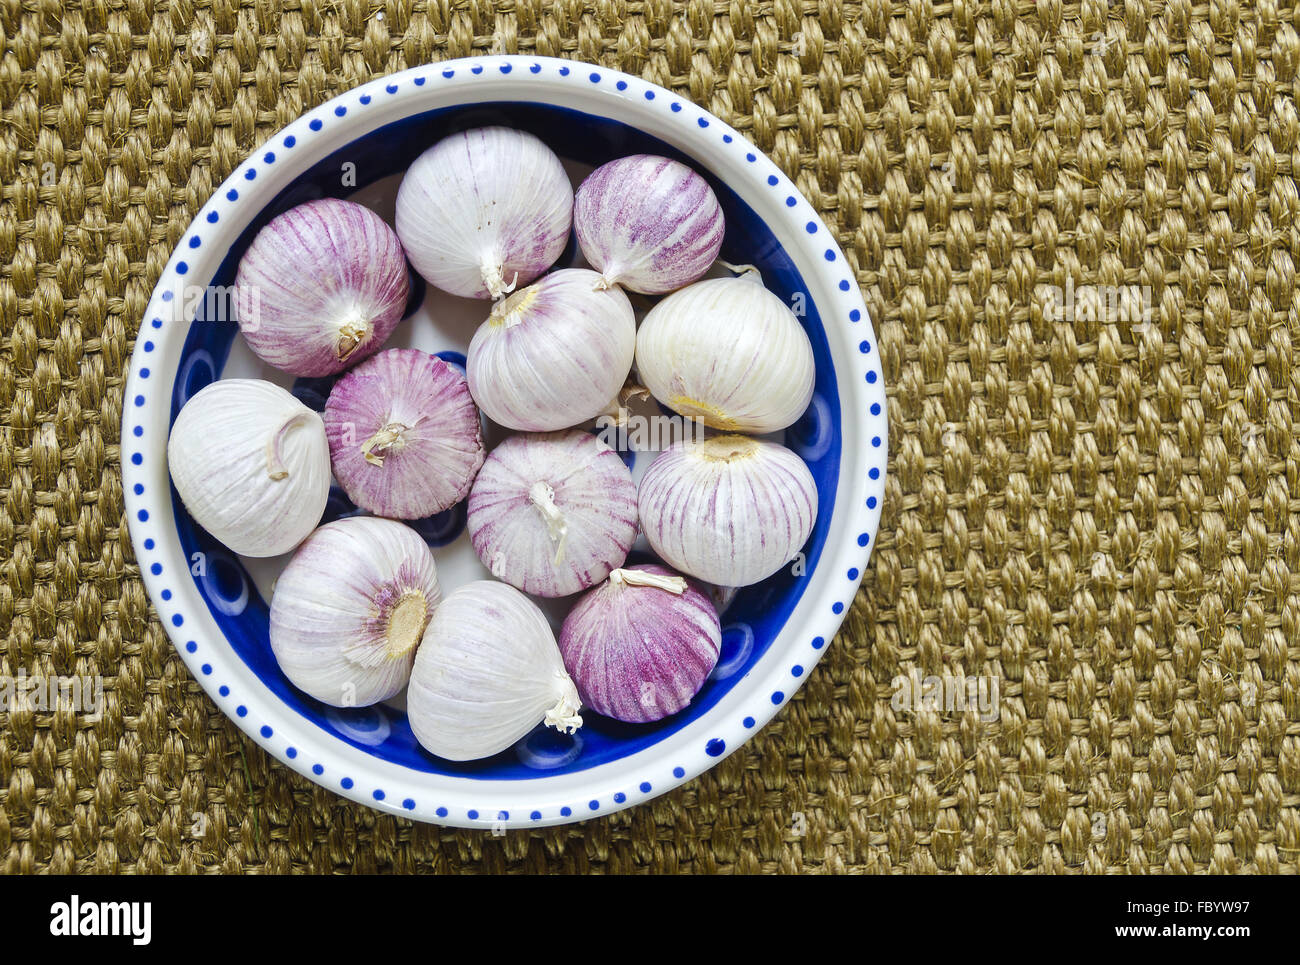 solo garlic in a porcelain bowl Stock Photo